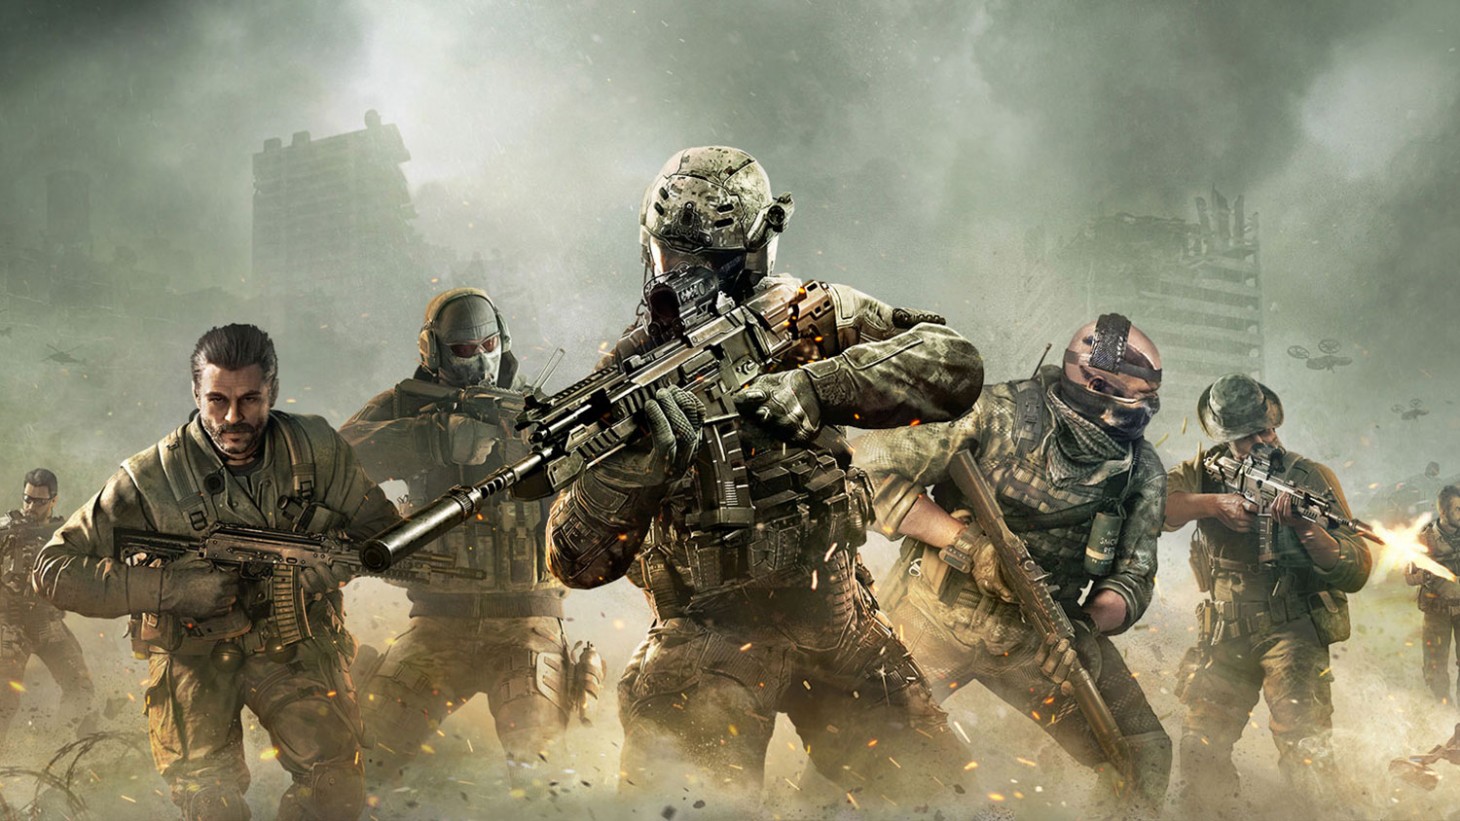 Call Of Duty Series and Its Latest installment COD: Vanguard